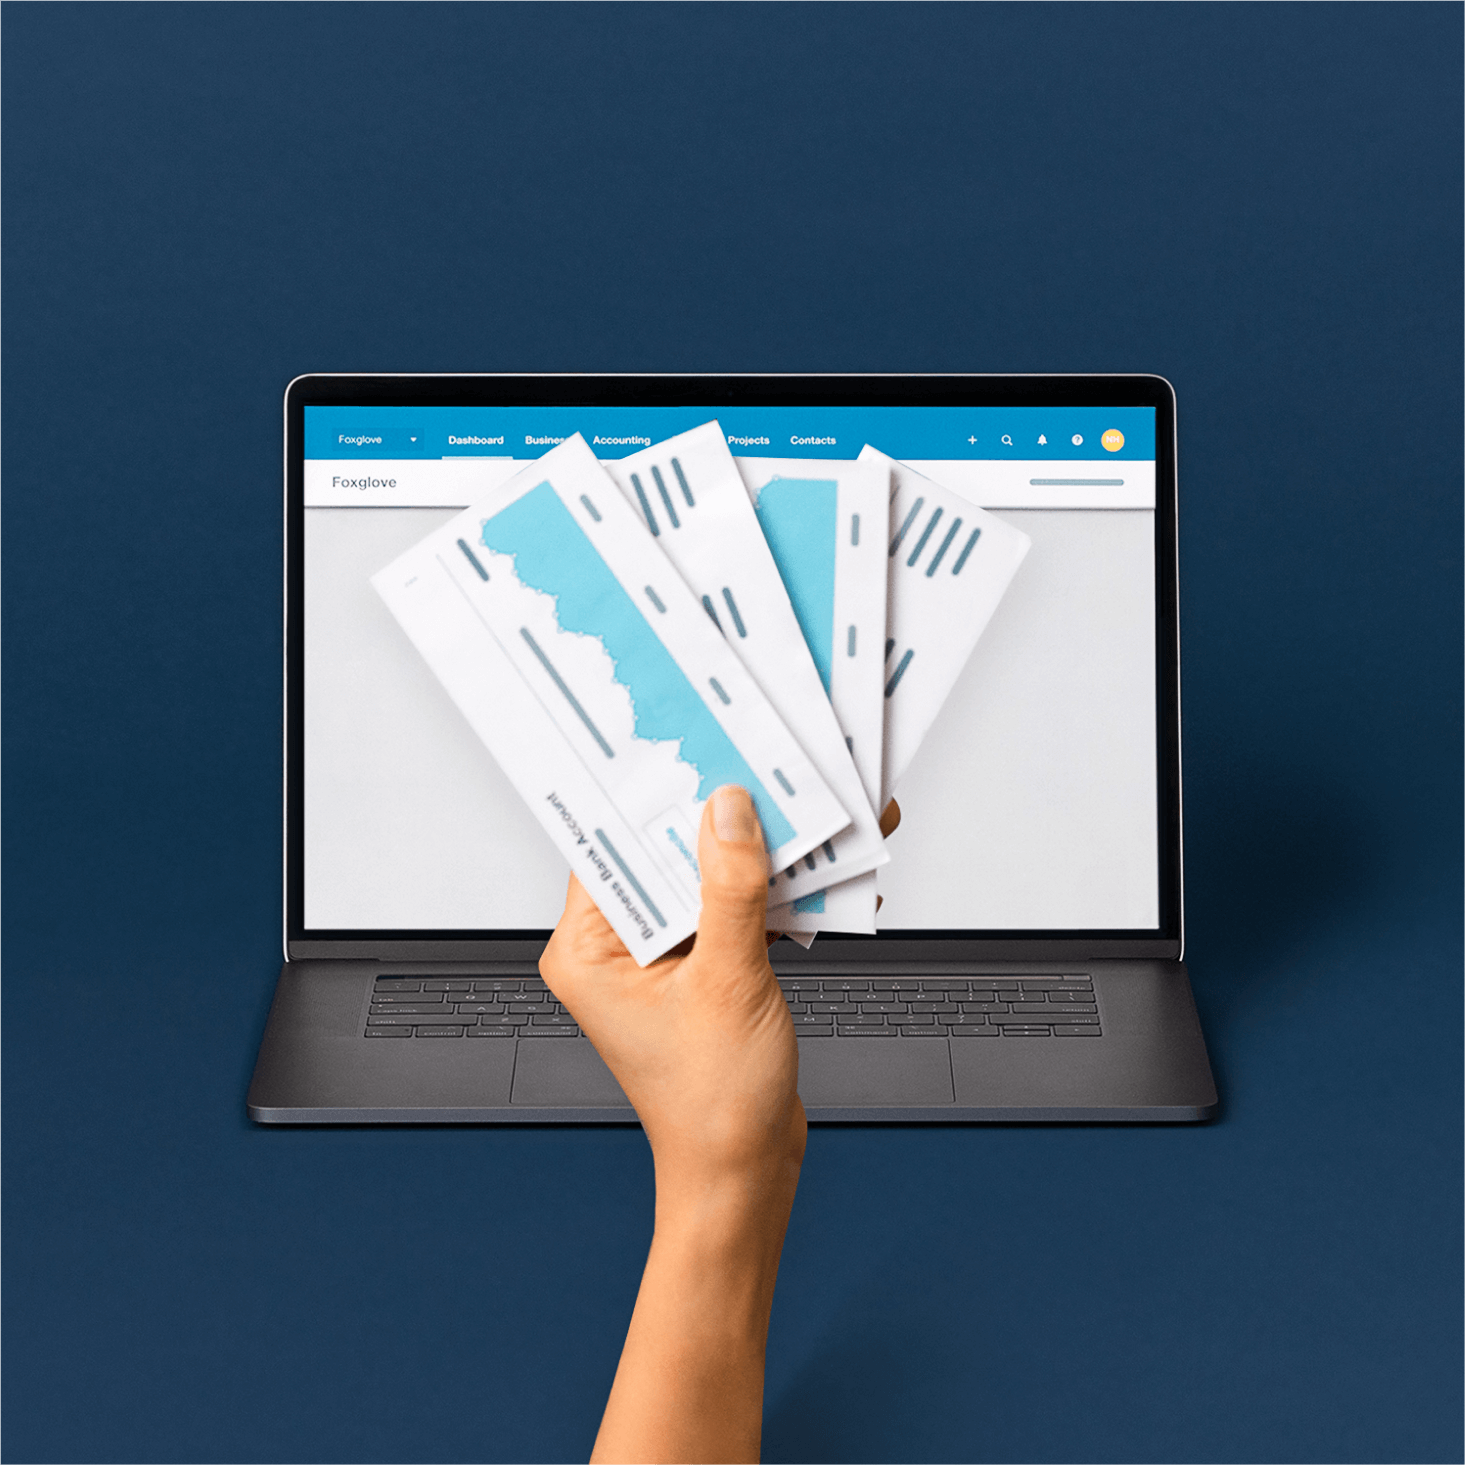 A hand holding illustrations of graphs in front of an open laptop depicts Xero’s survey to gauge practice performance.